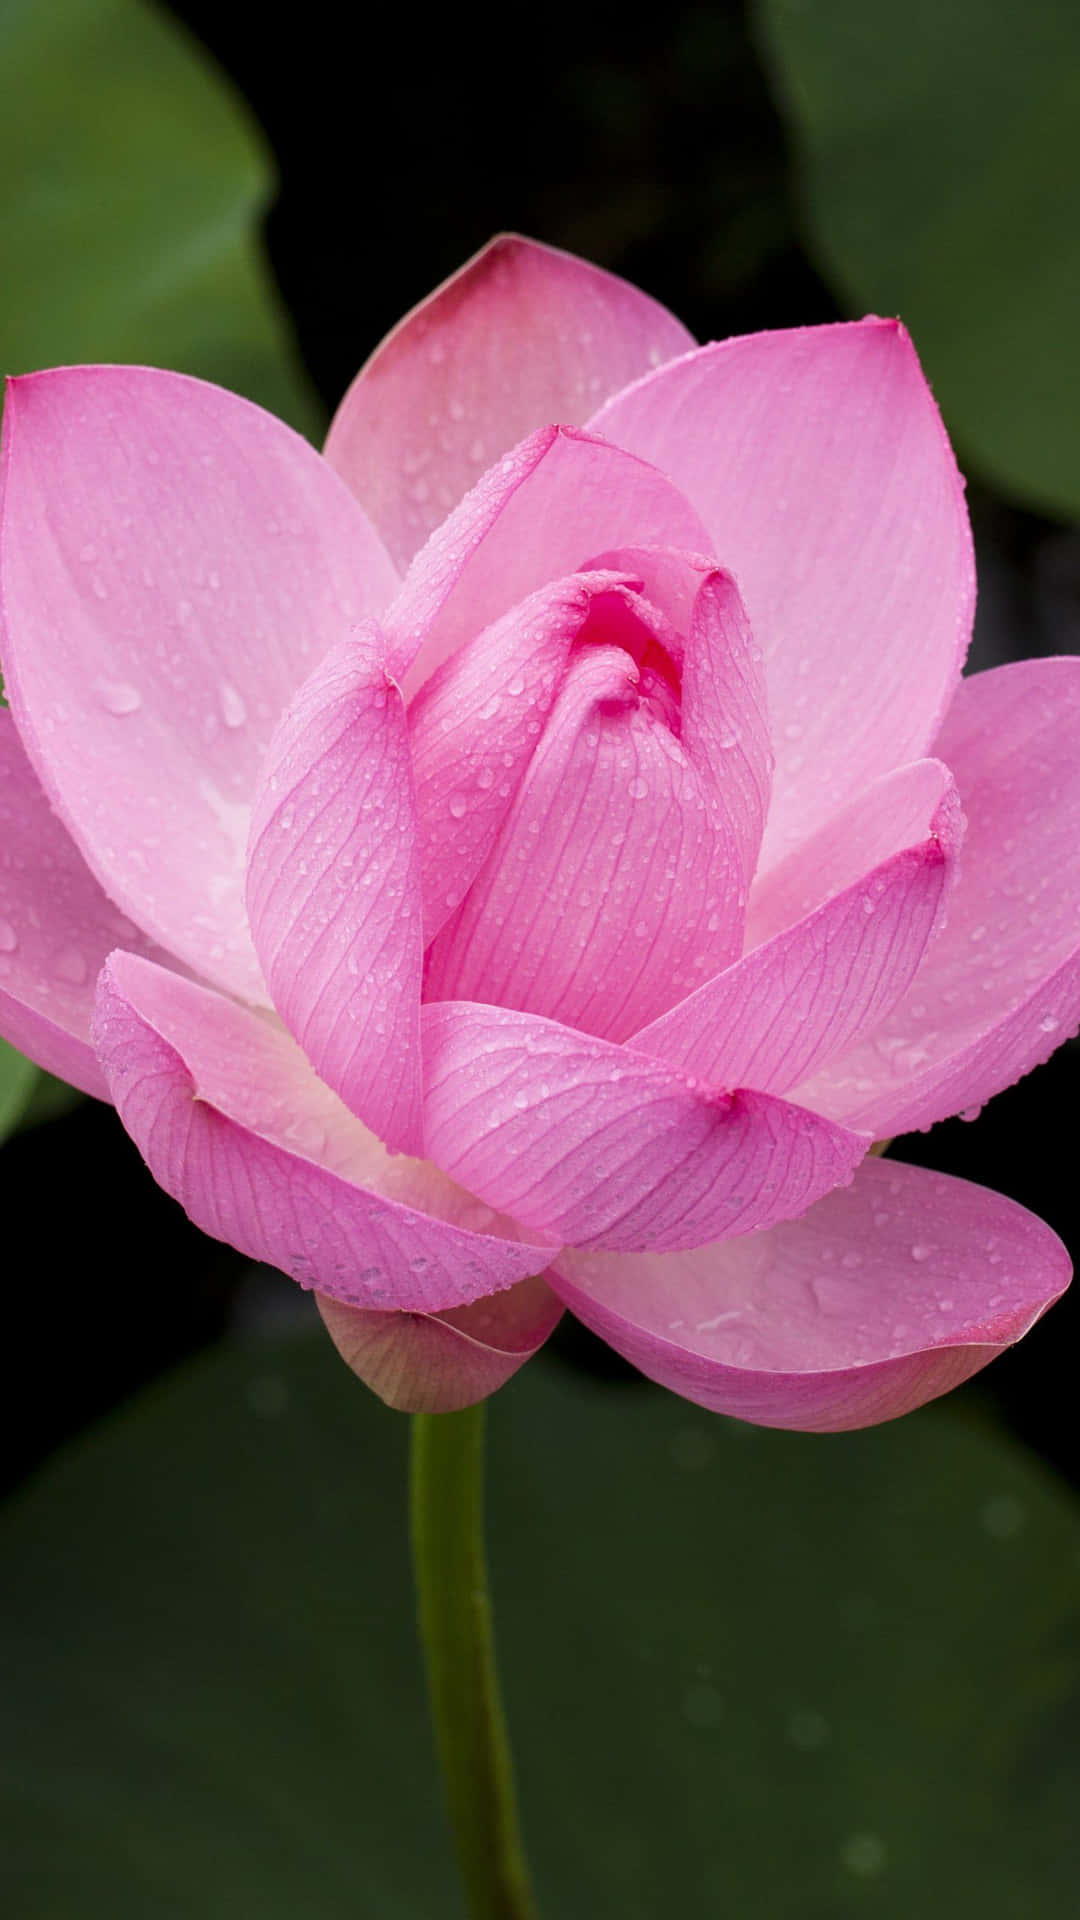 The Beauty of Nature: A Lotus Flower"